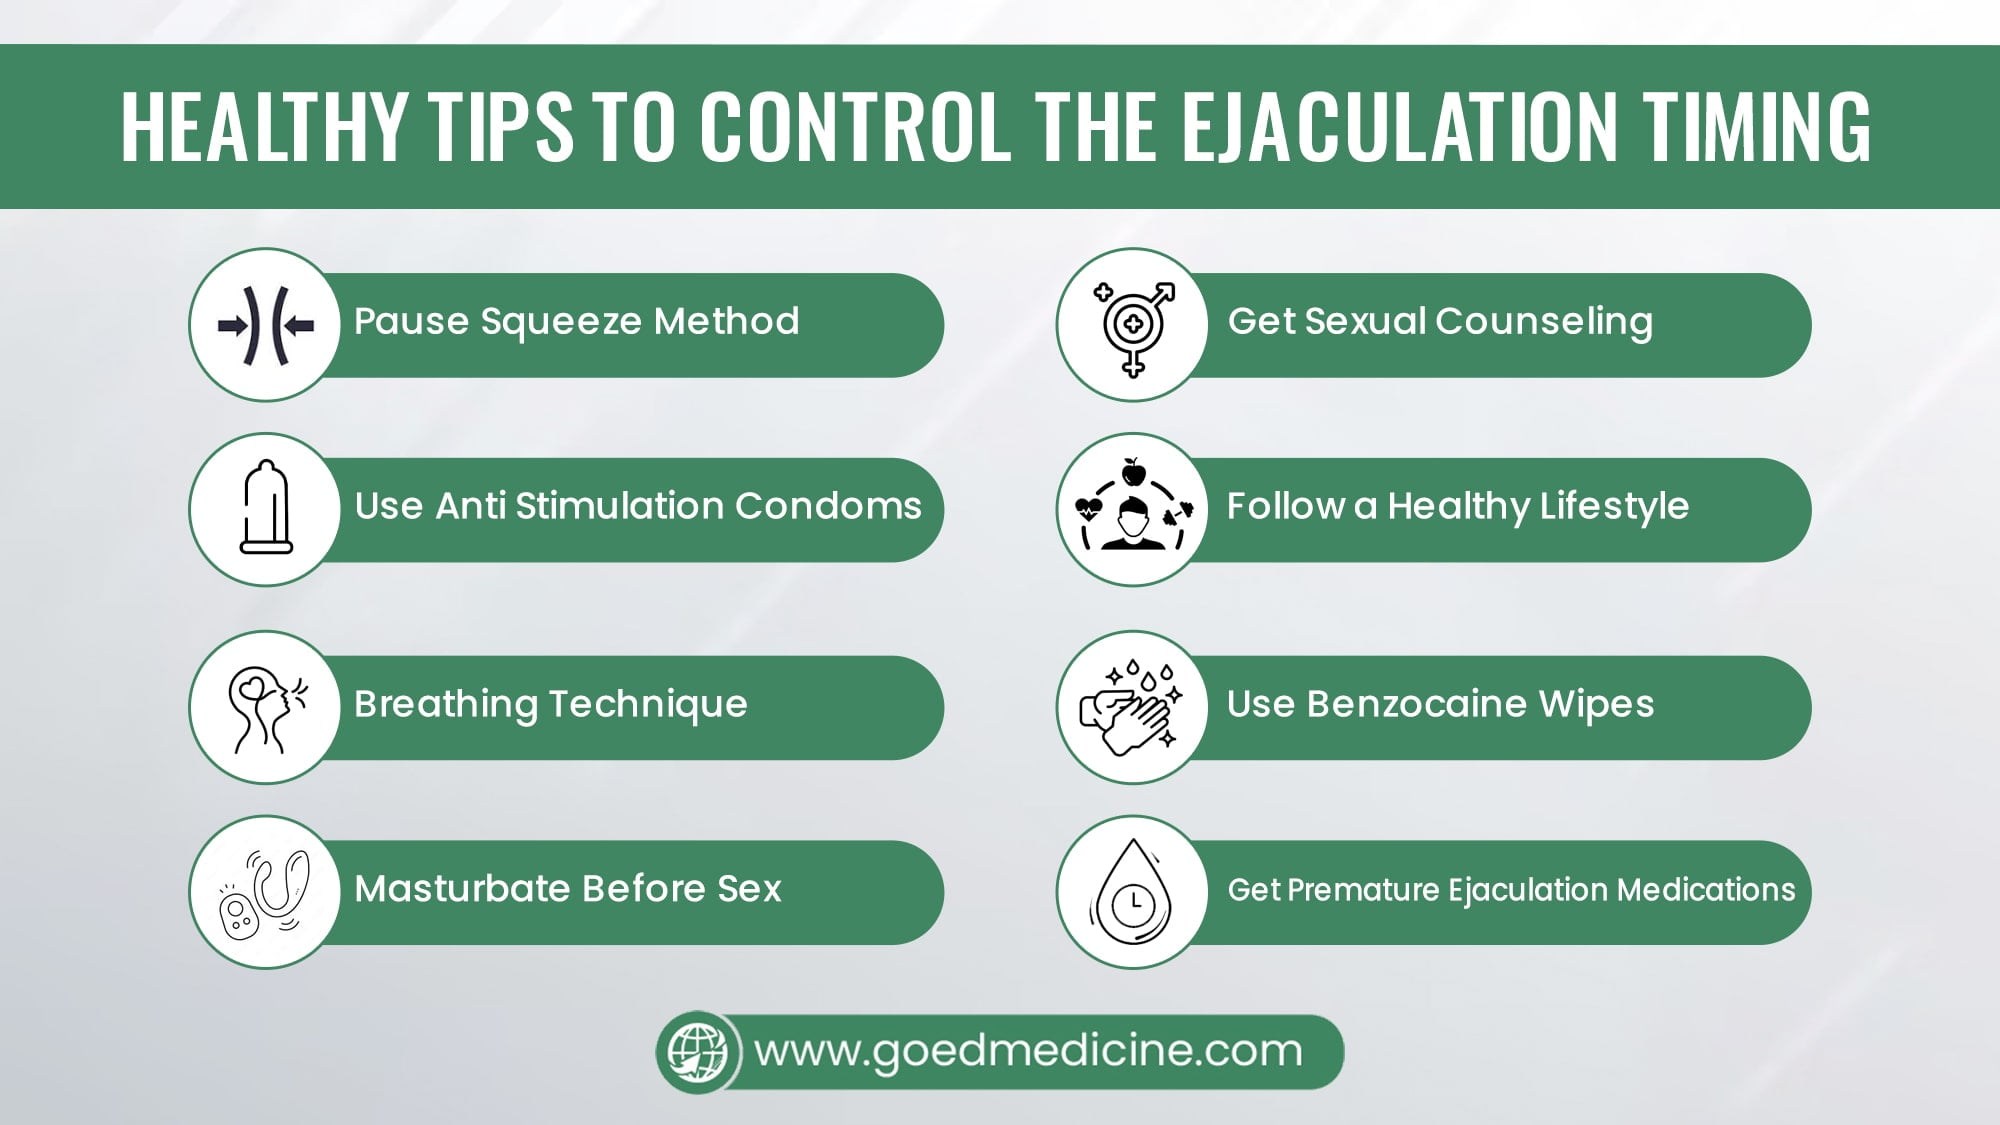 Healthy Tips to Control the Ejaculation Timing